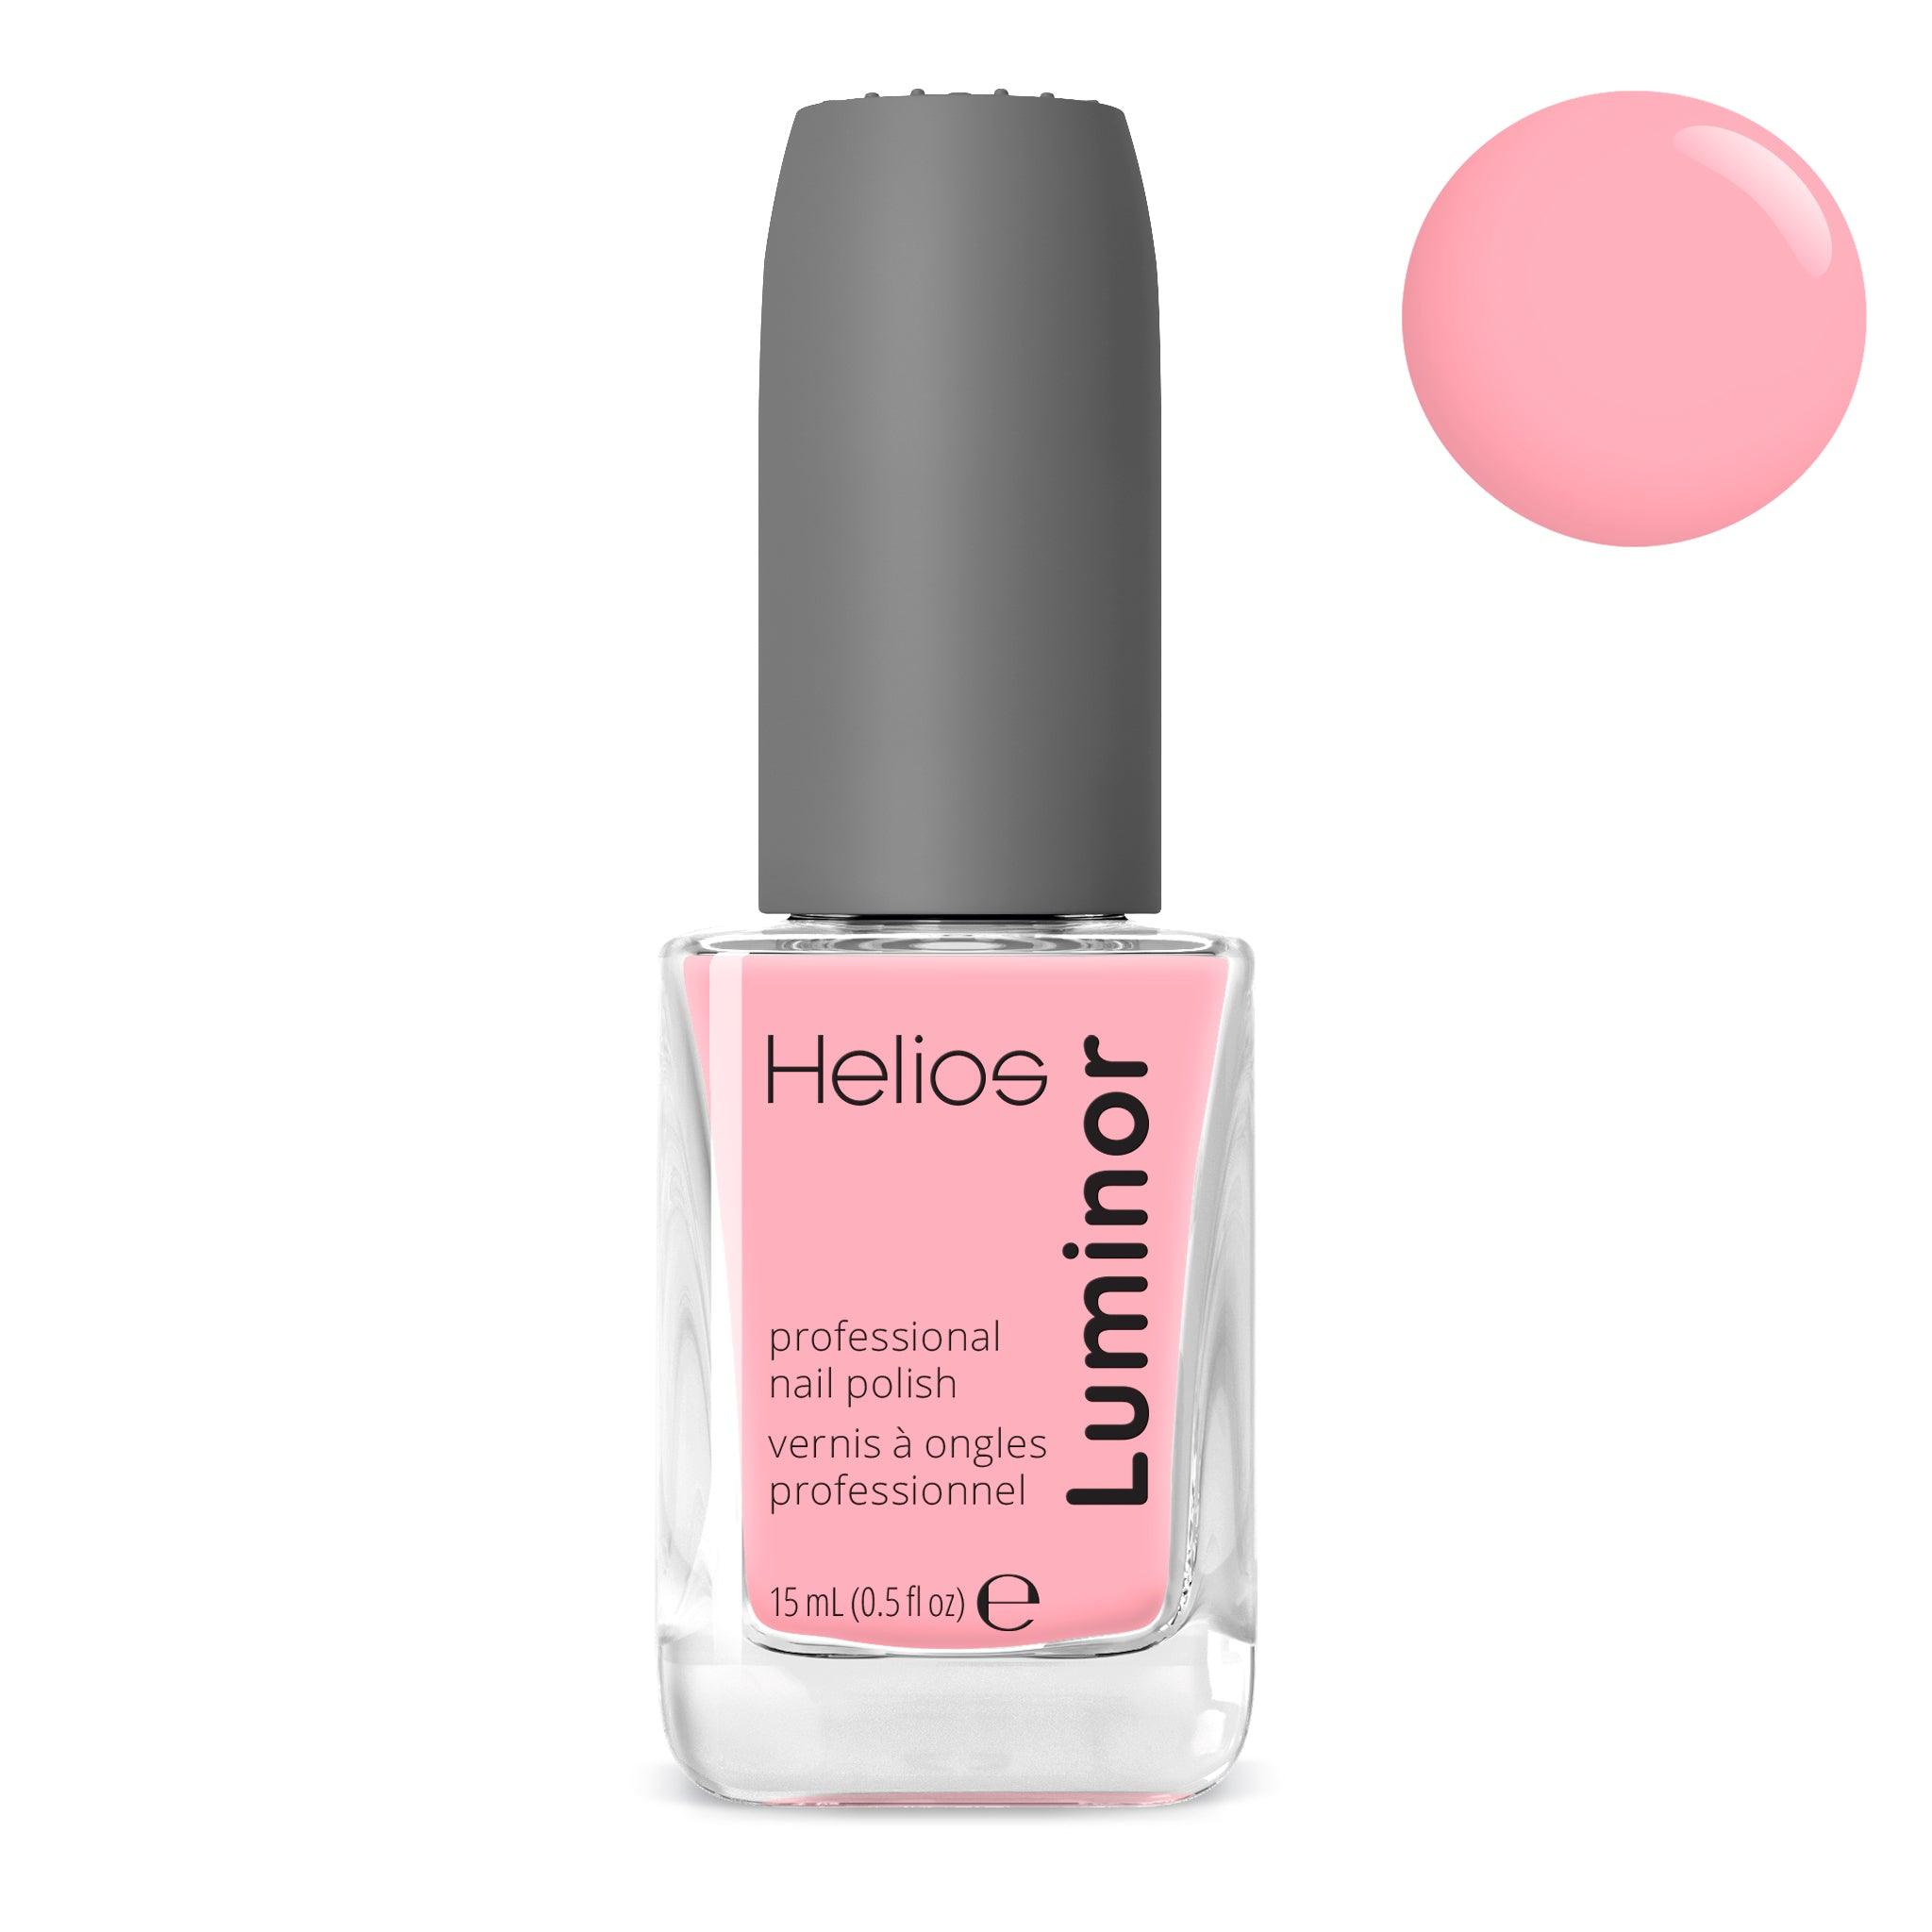 PRETTY IN PINK - Helios Nail Systems